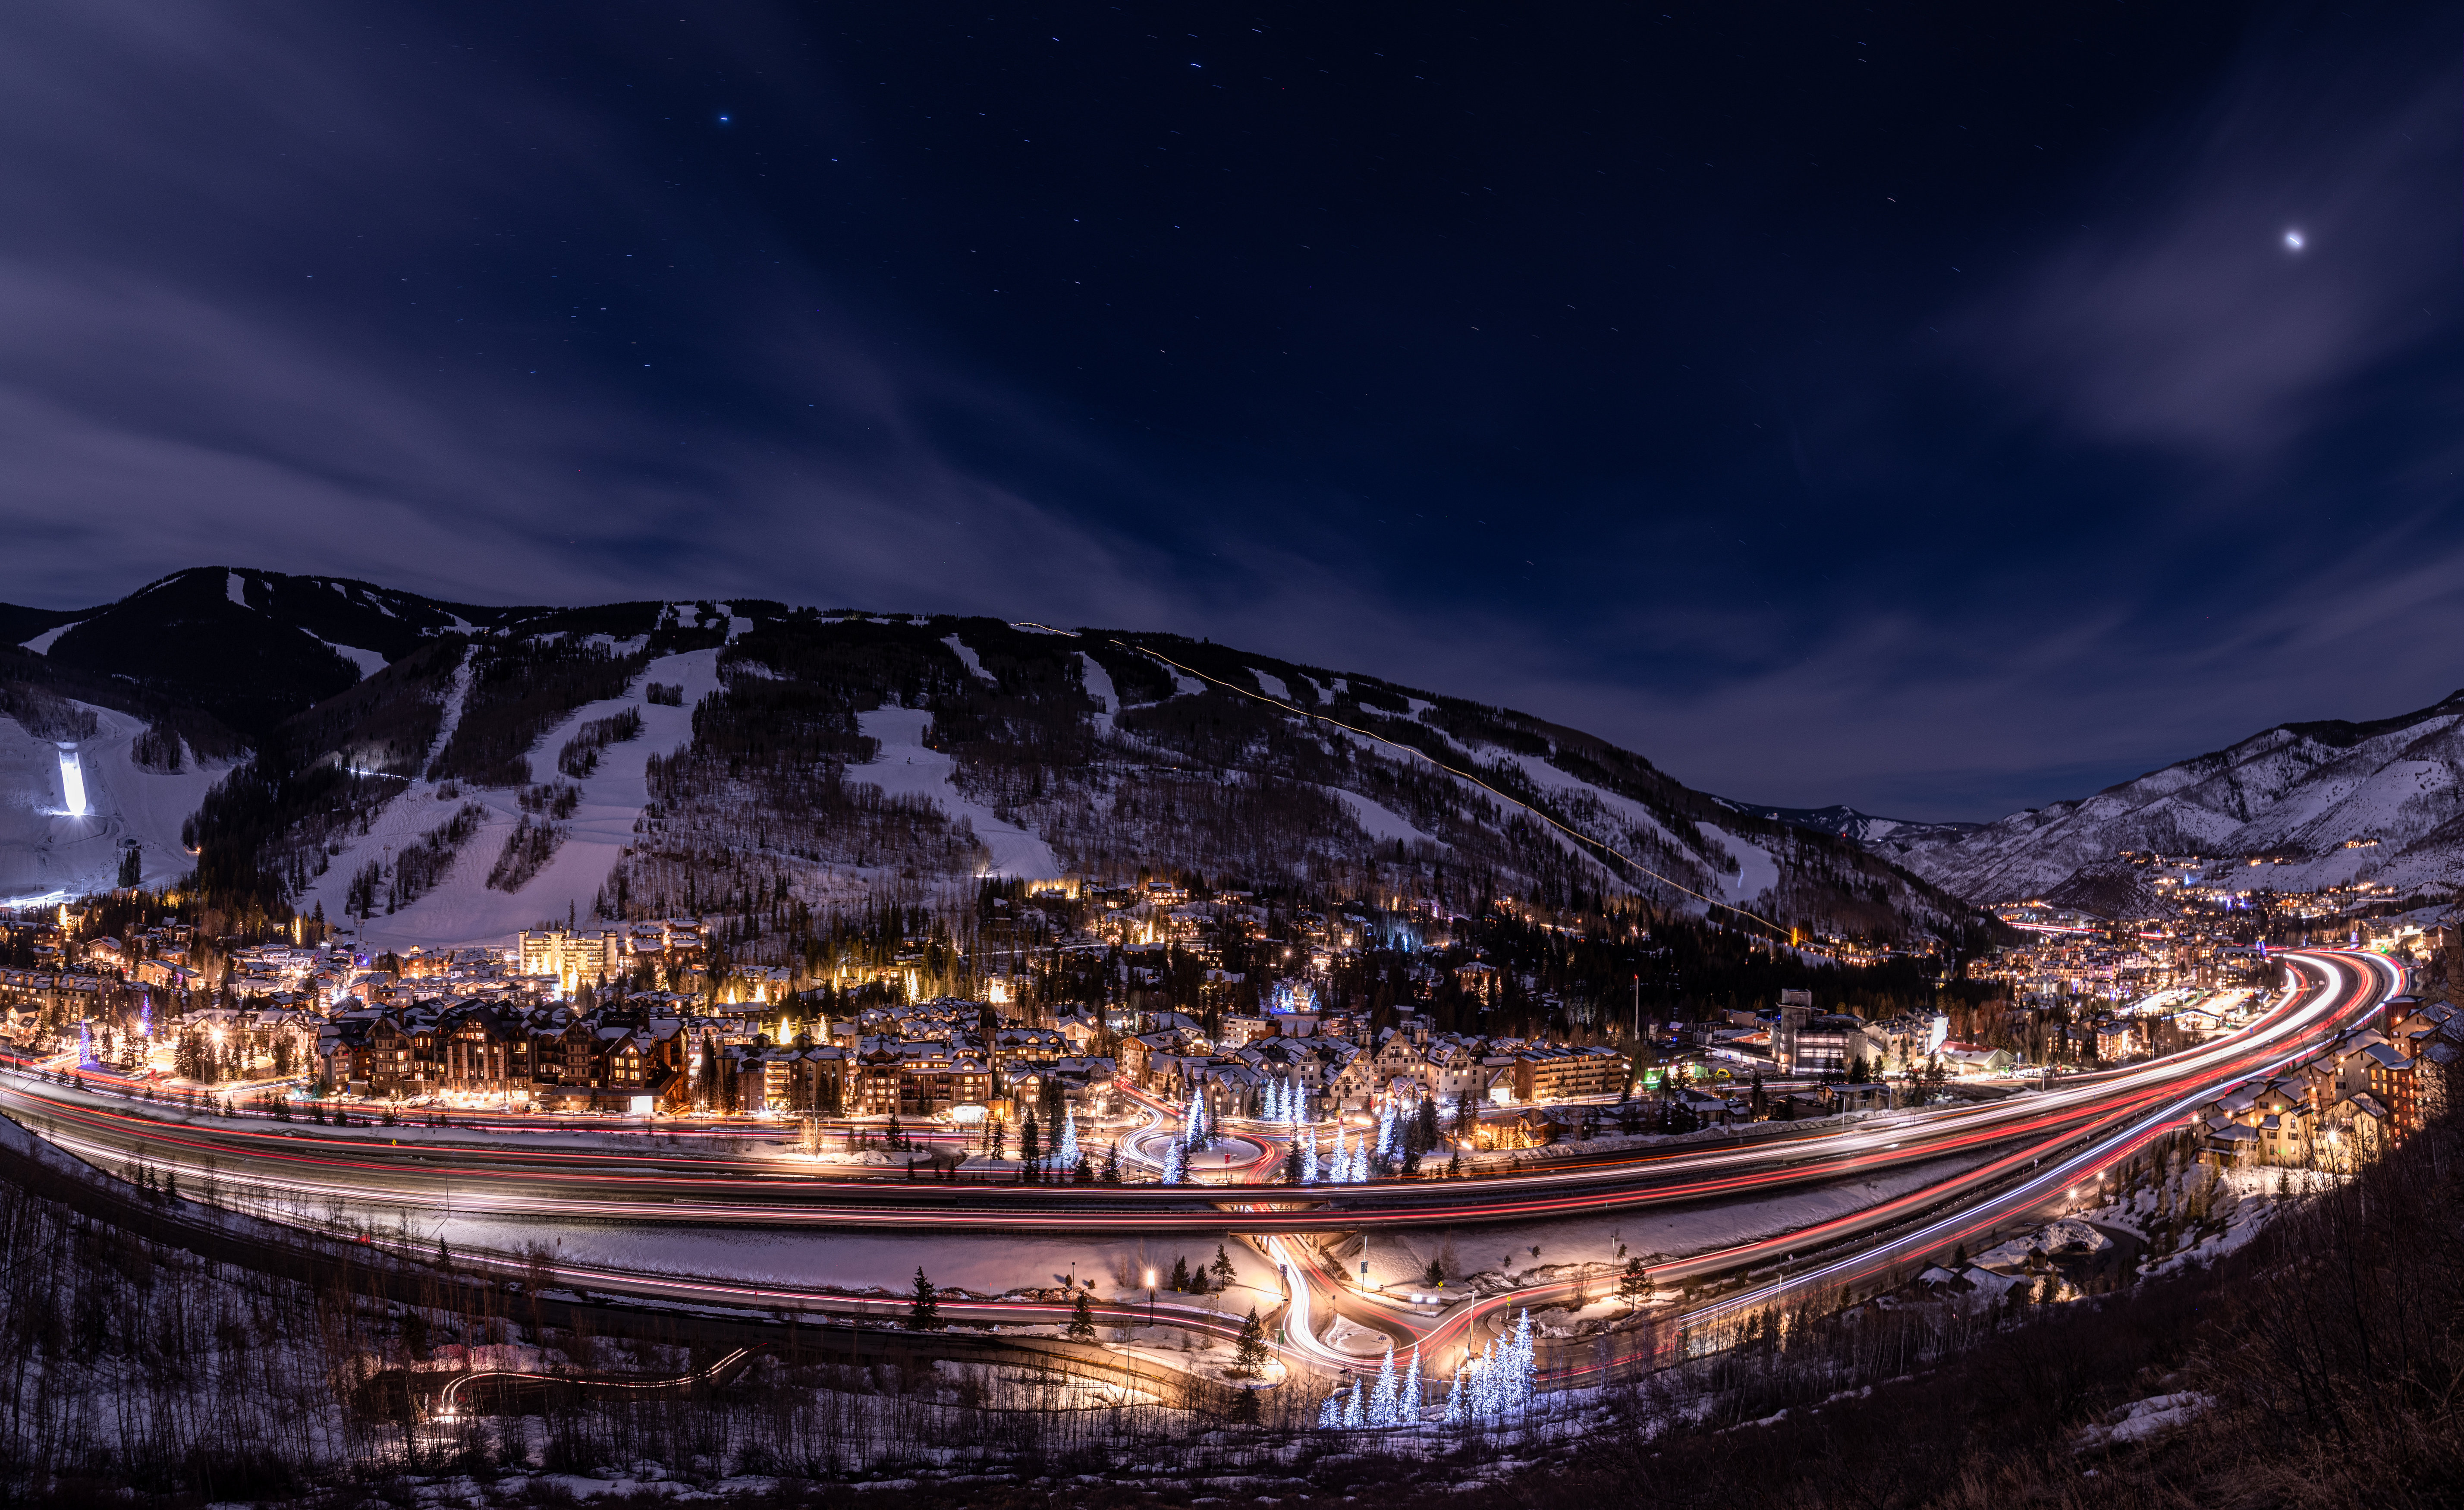 Night time scene of the town of Vail.